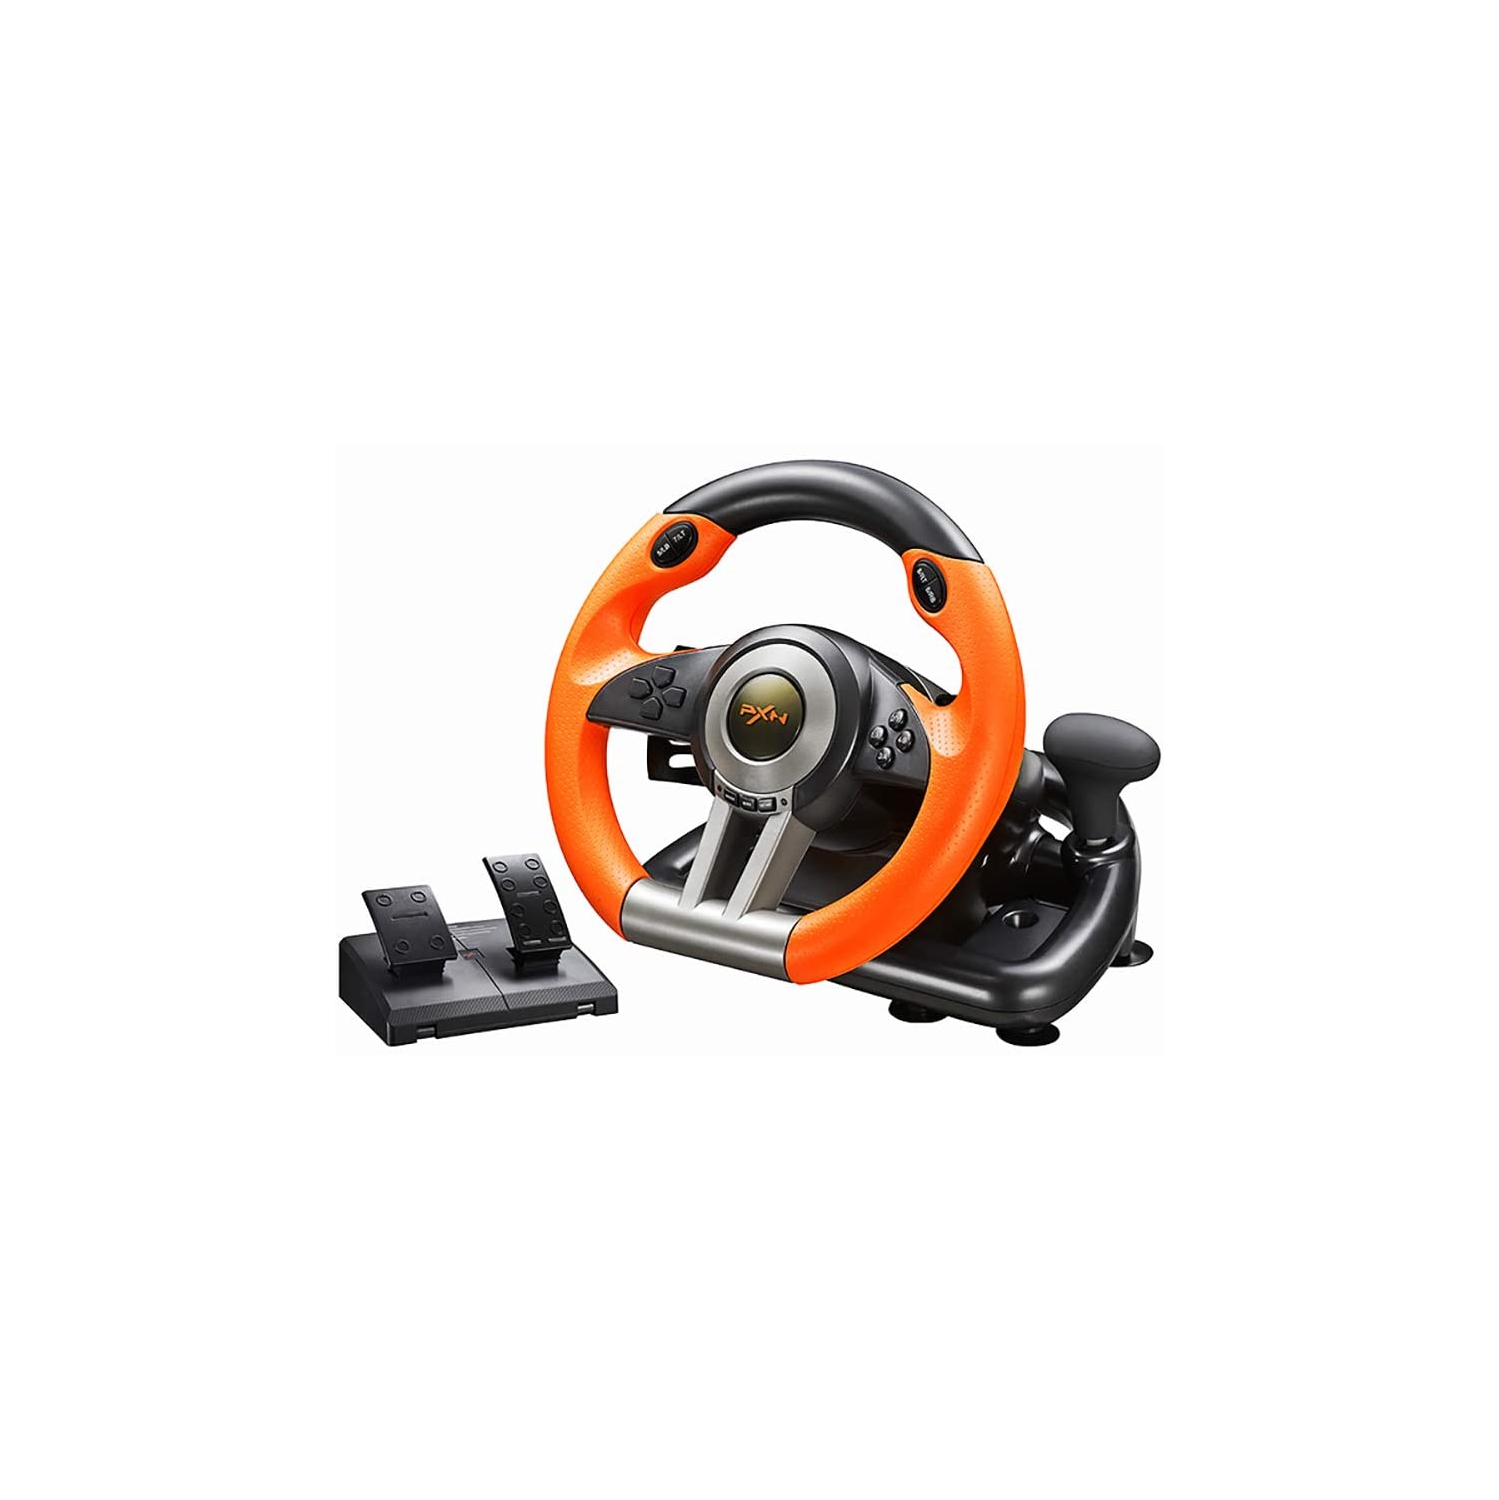 Refurbished (Good) - PXN V3II 180 Degree Universal Usb Car Sim Race Steering Wheel with Pedals for PS3, PS4, Xbox One, Nintendo Switch - (Orange)